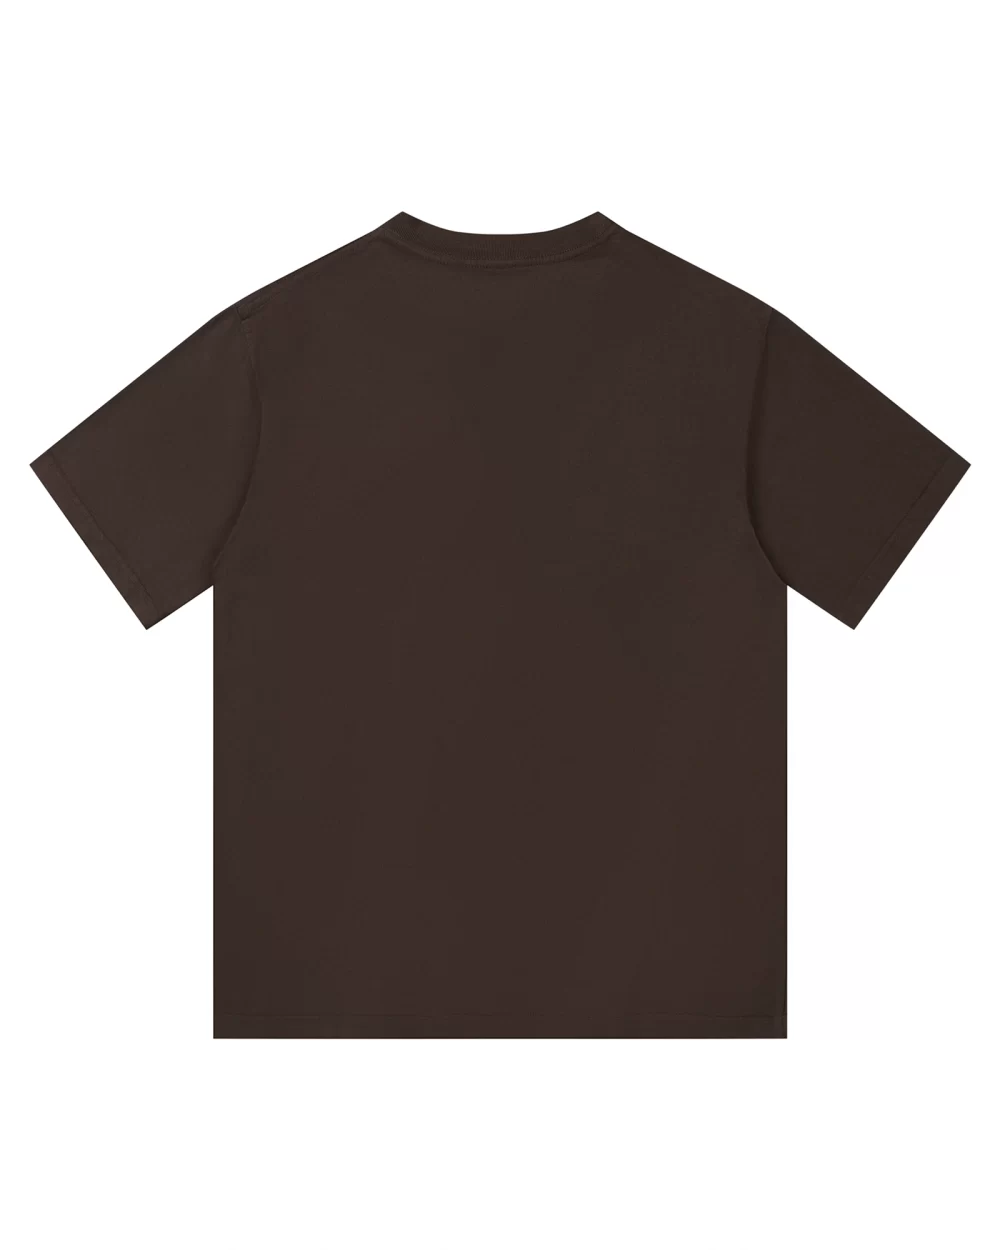 Washed Brown Wild Tee 8